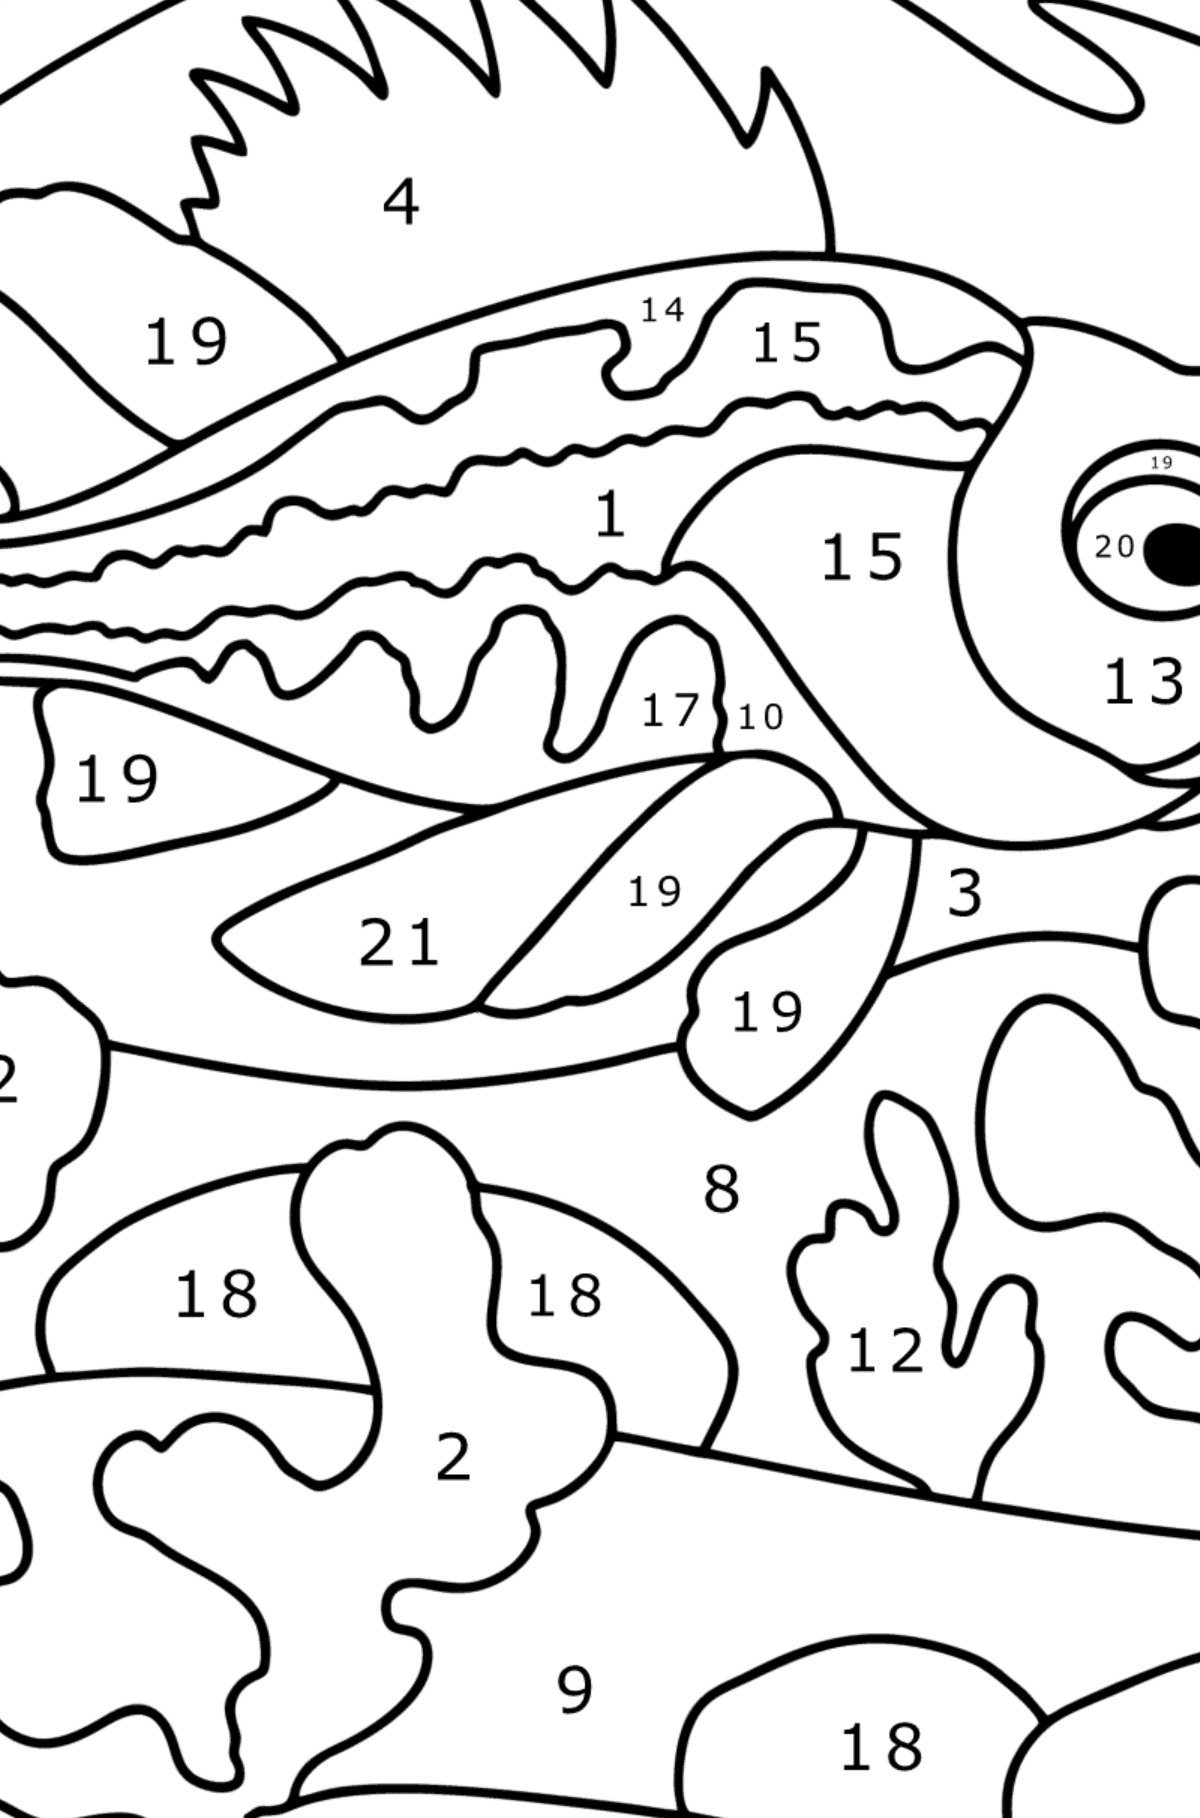 Sea bass coloring page - Coloring by Numbers for Kids